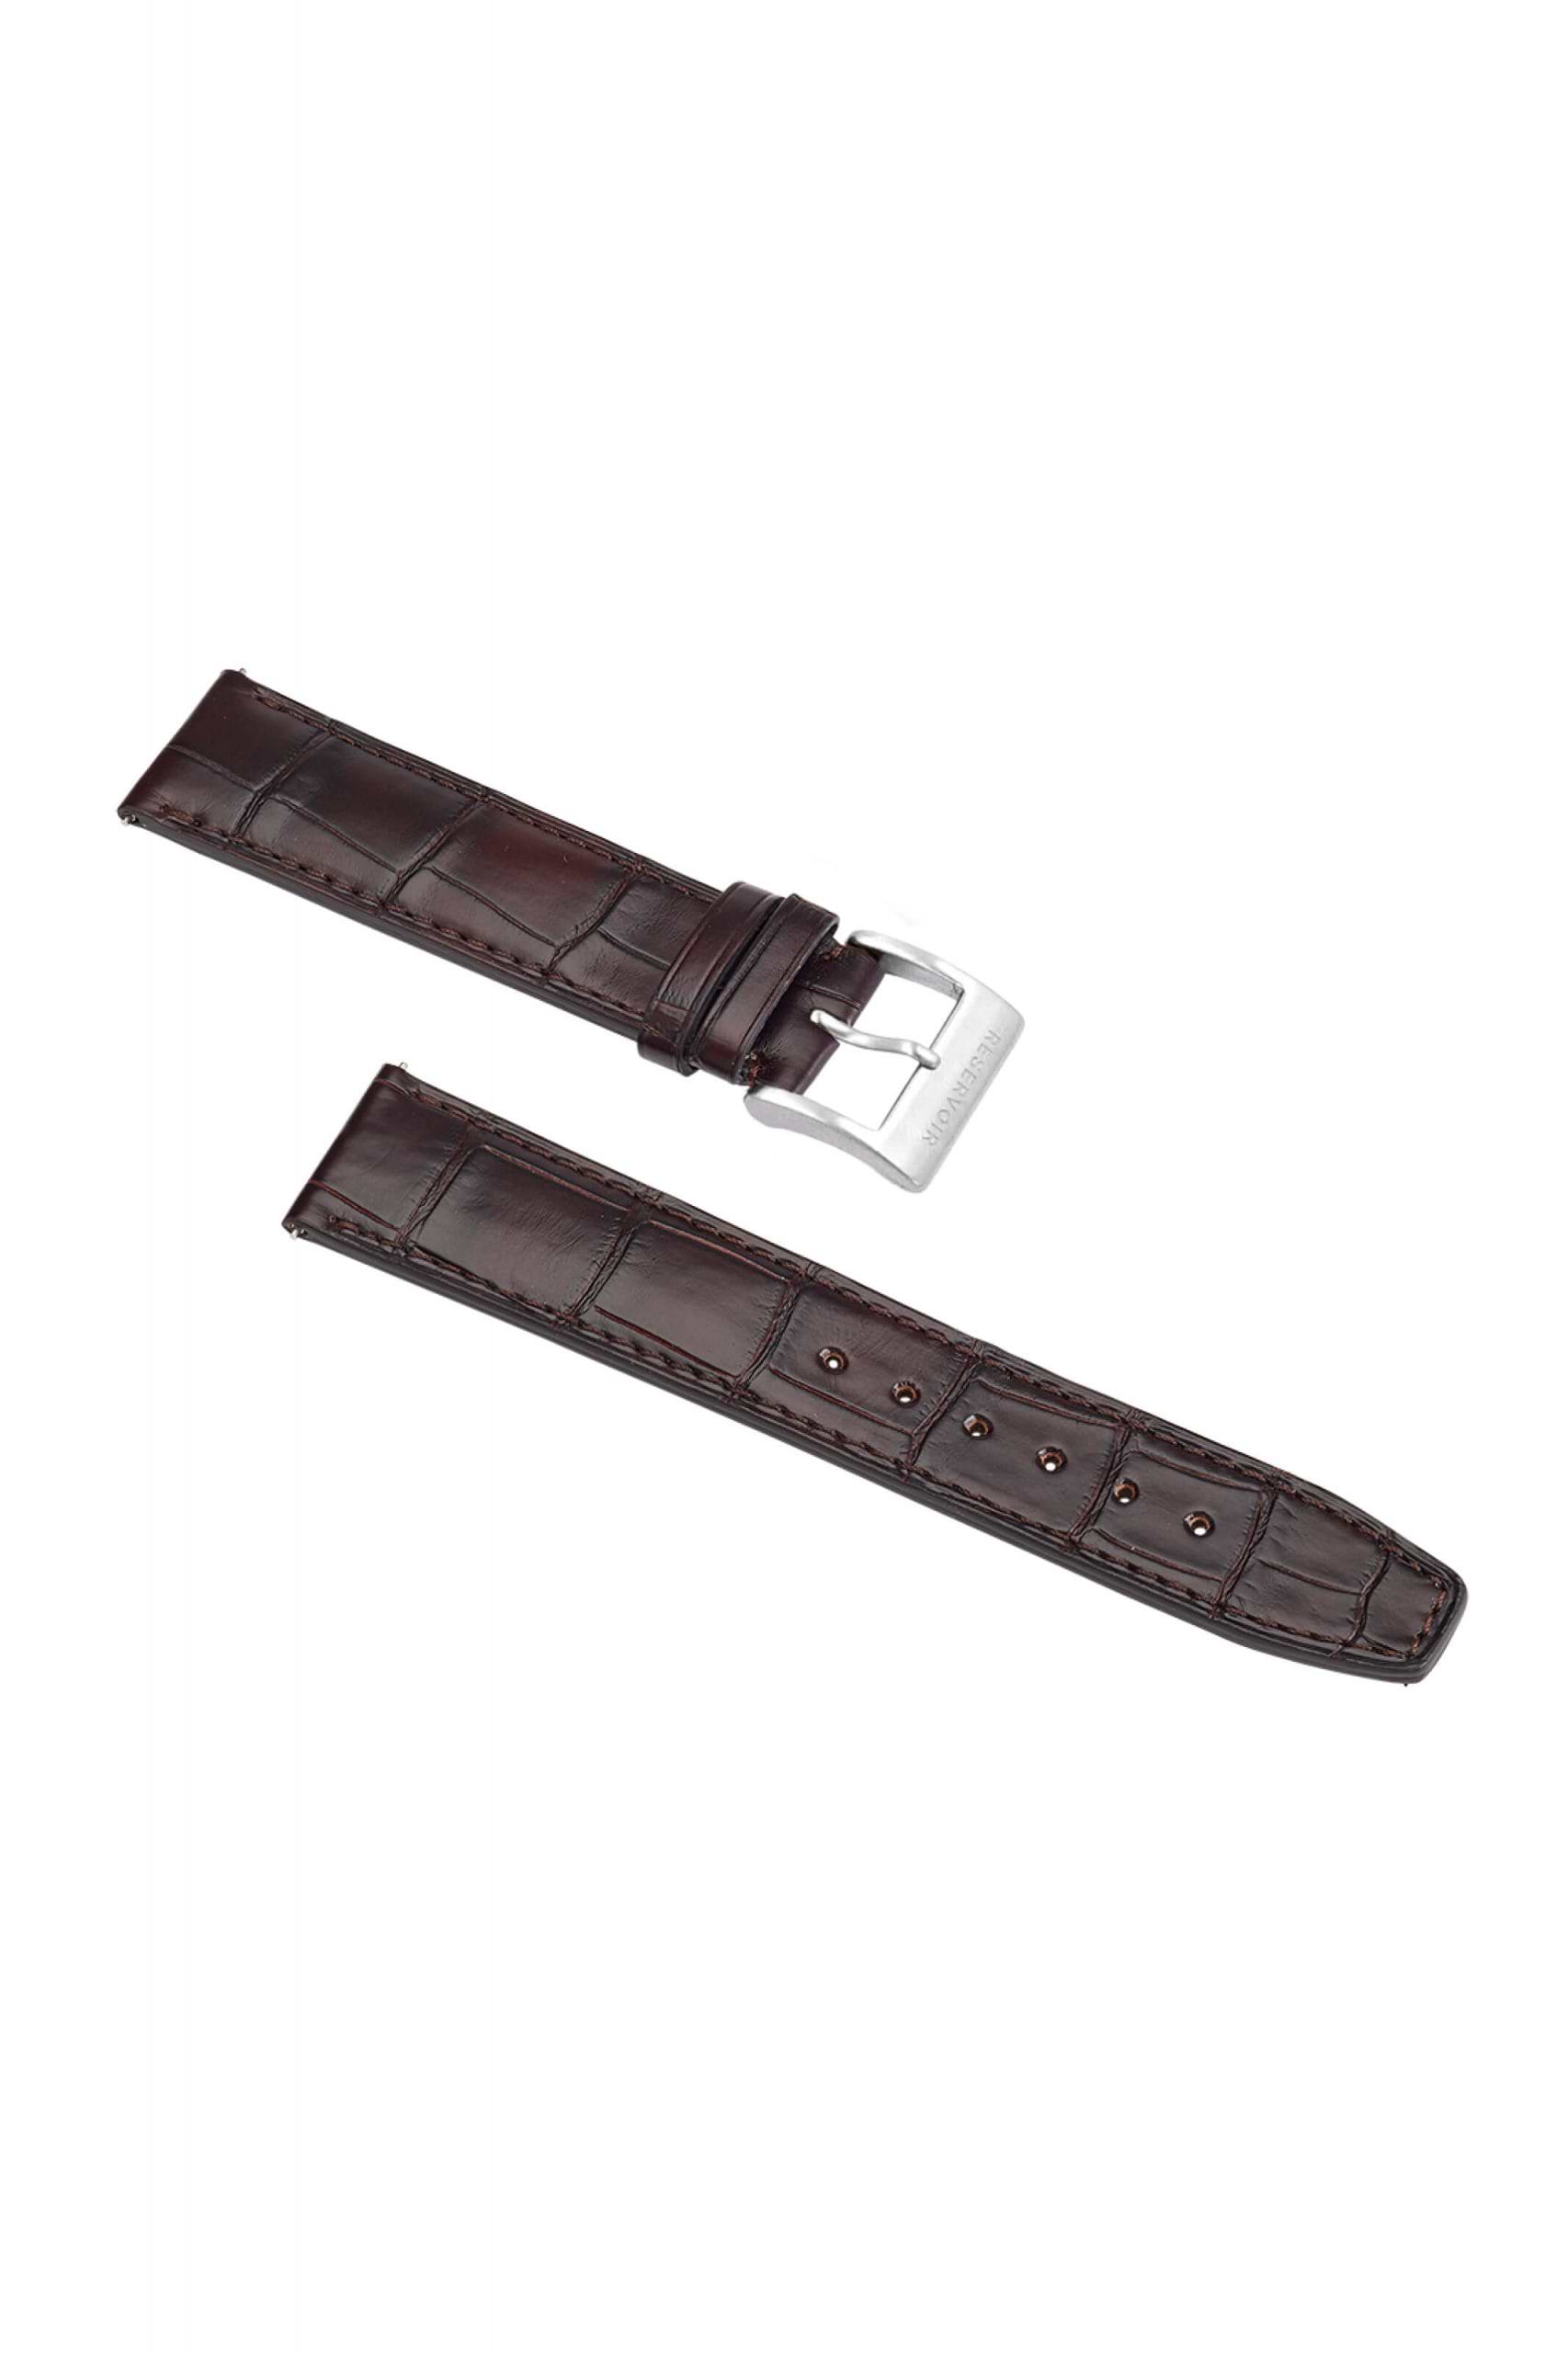 Brown leather watch strap in two pieces with crocodile texture and silver buckle, adjustable holes.